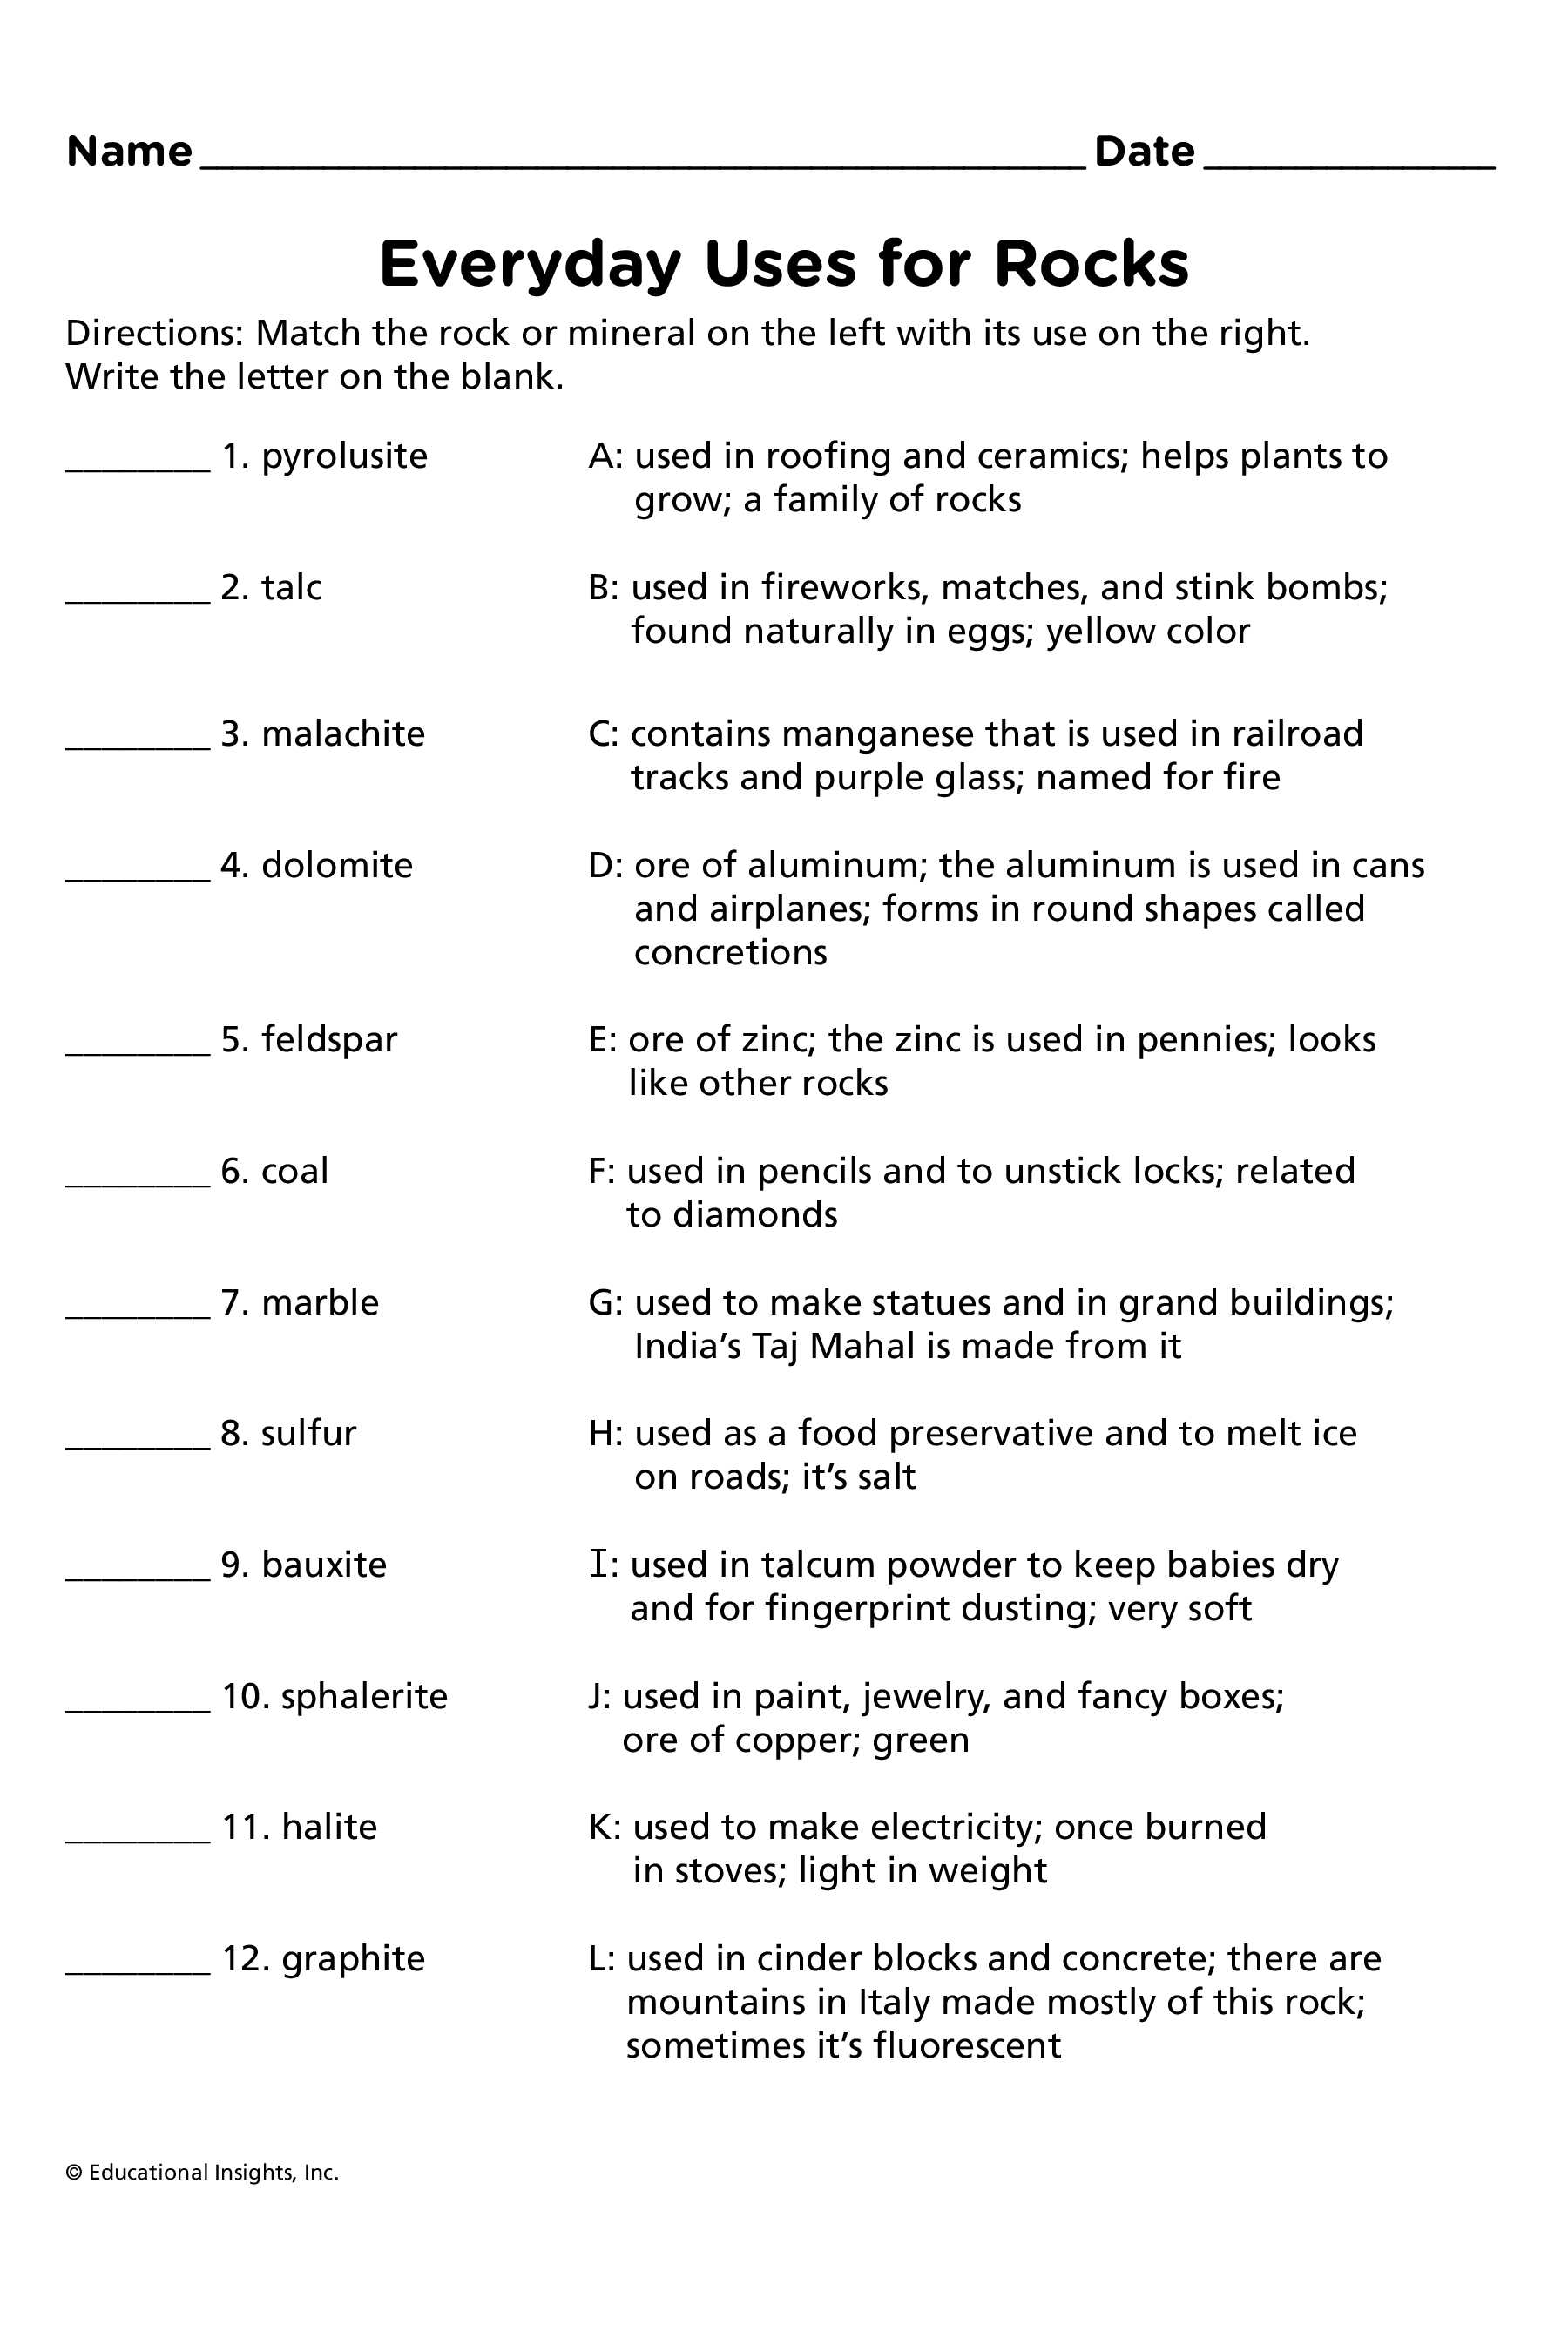 Introduction to Genetics Worksheet together with Everyday Uses Rock & Card Set Pinterest